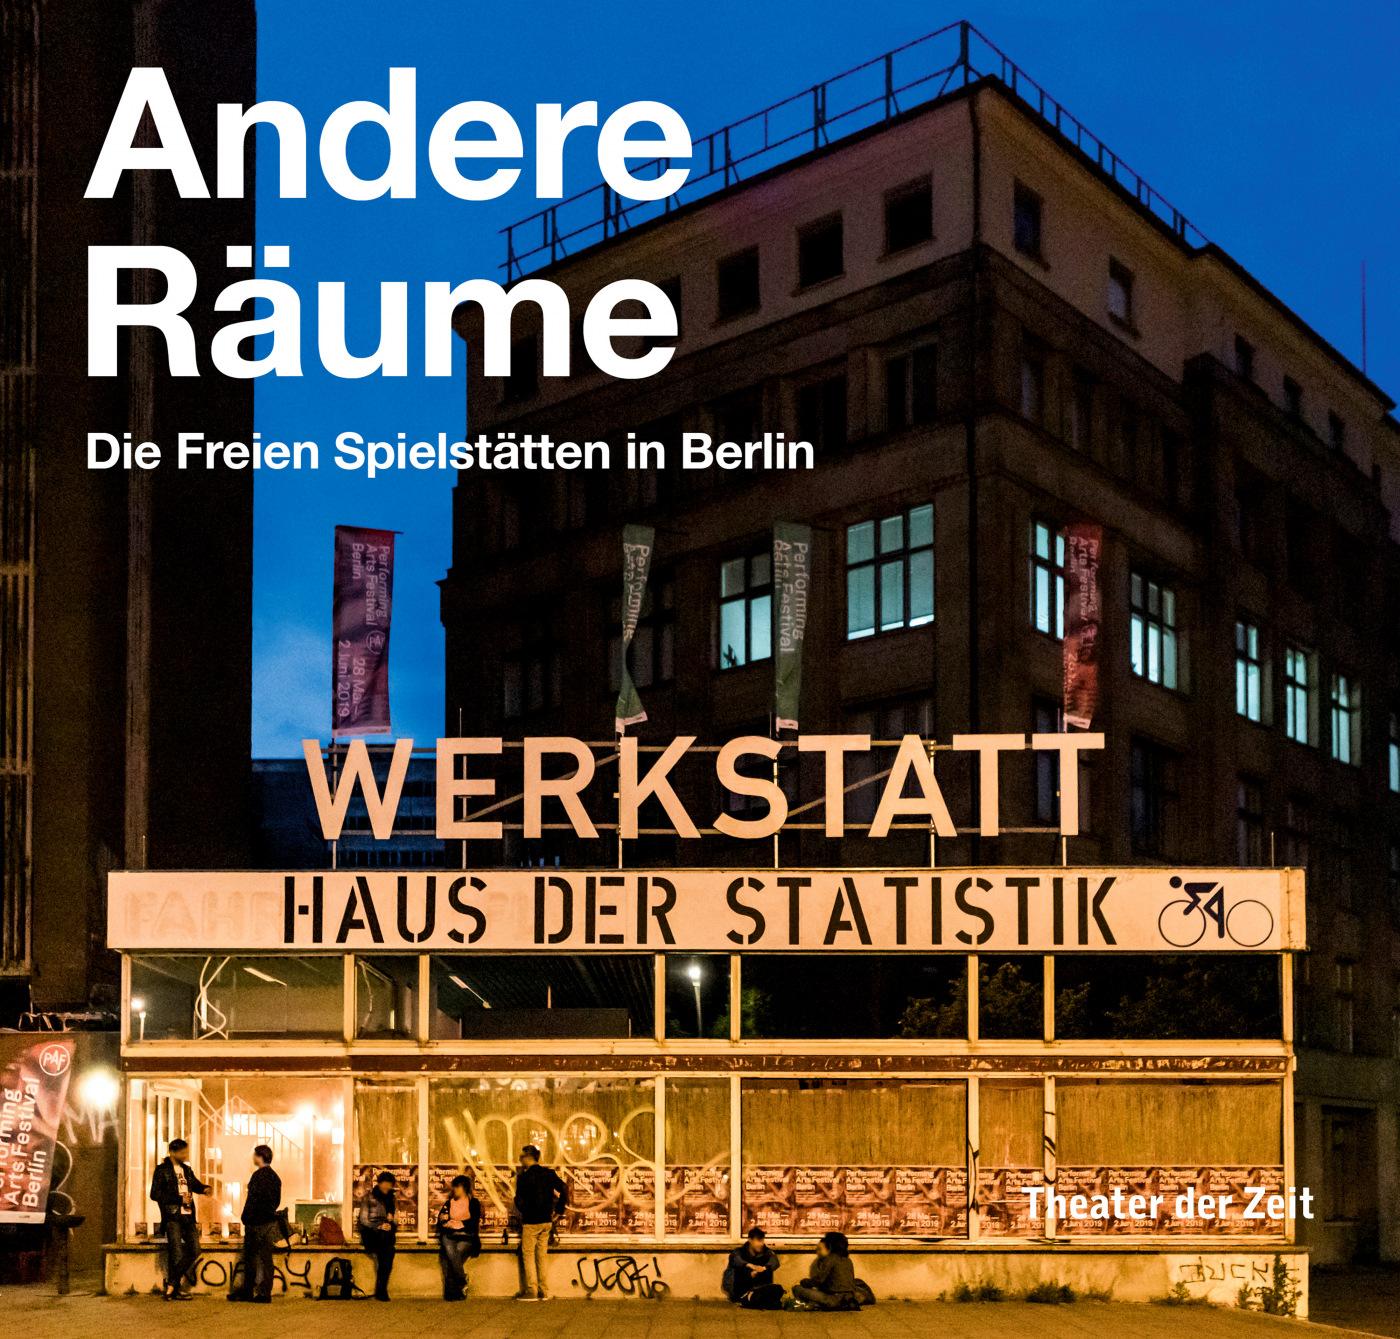 "Andere Räume – Other Spaces"